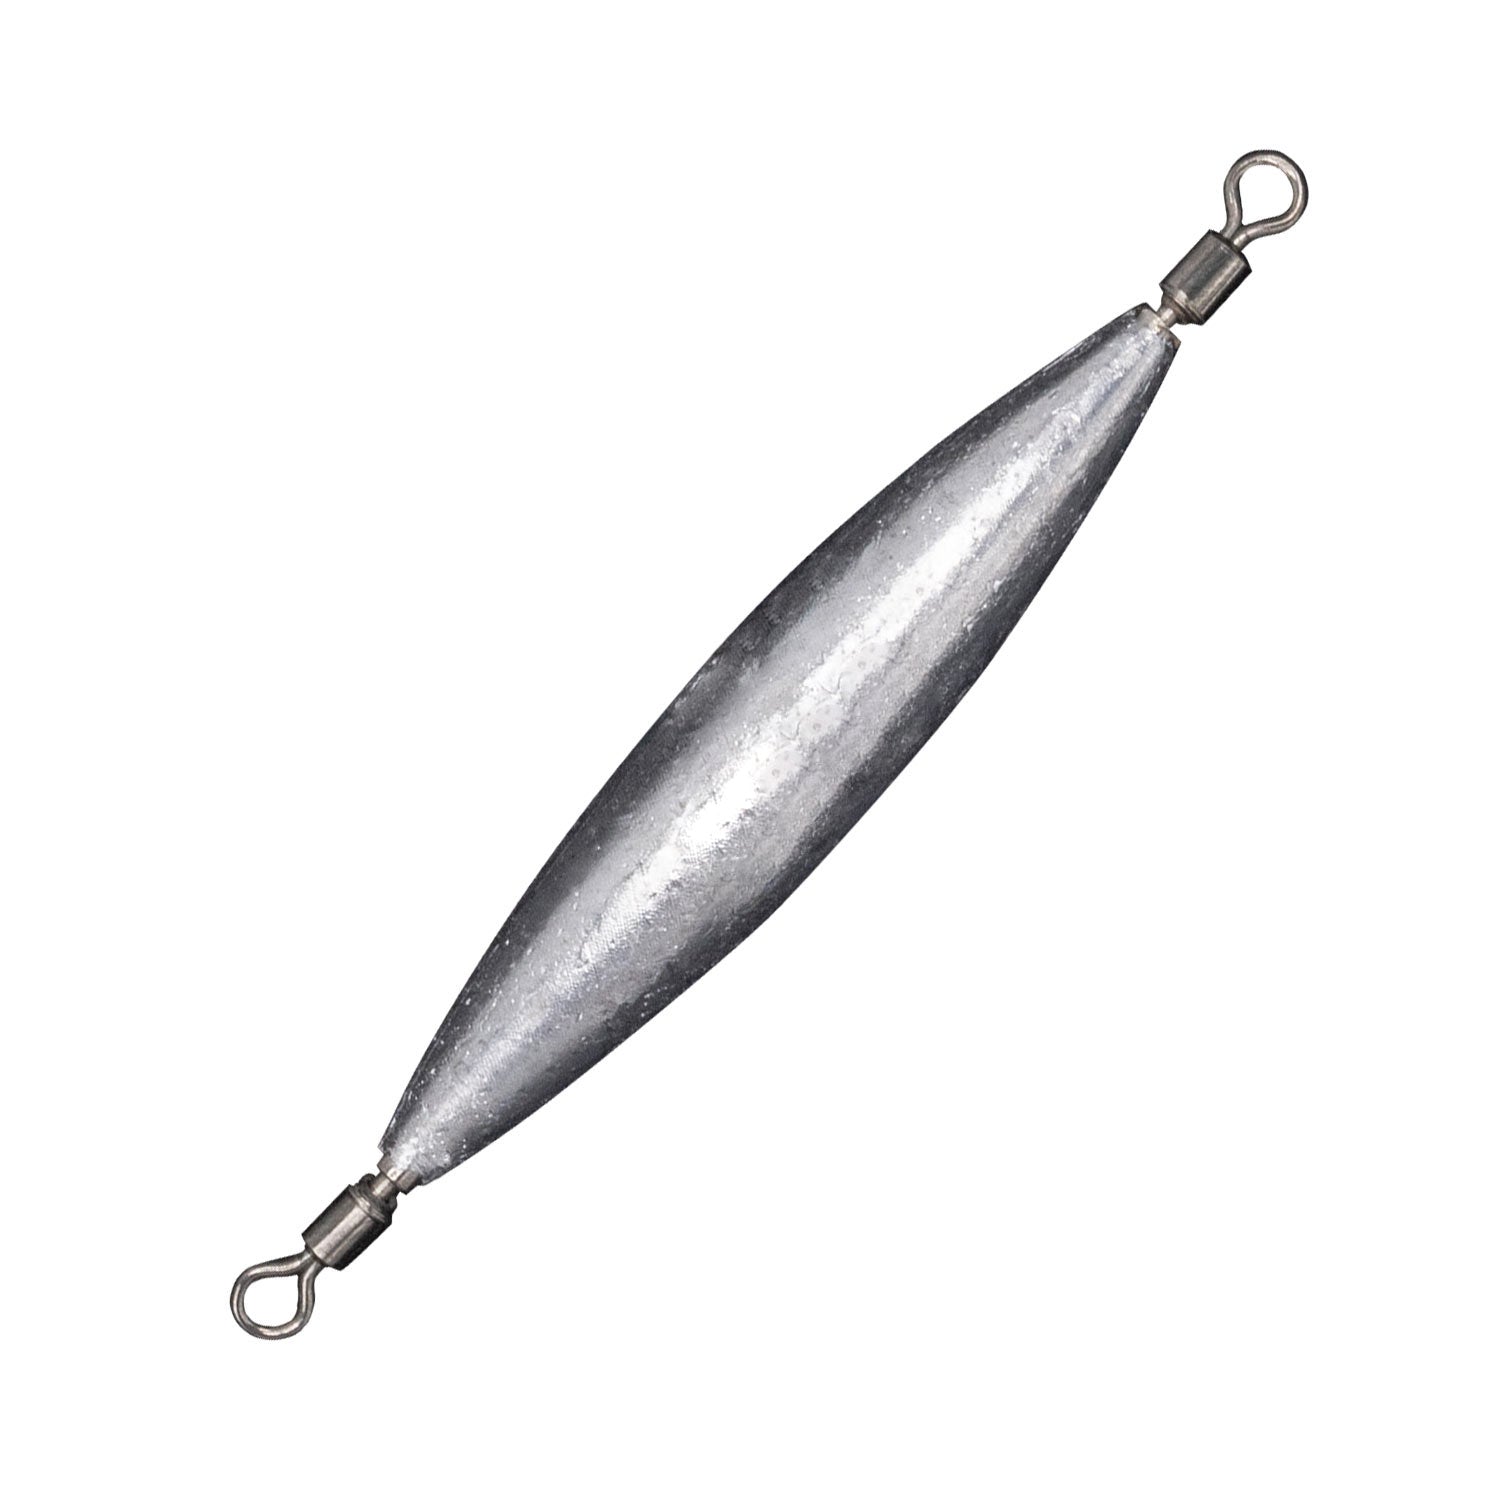 Single stainless steel swivel 7 mm Denty Spearfishing - Nootica - Water  addicts, like you!